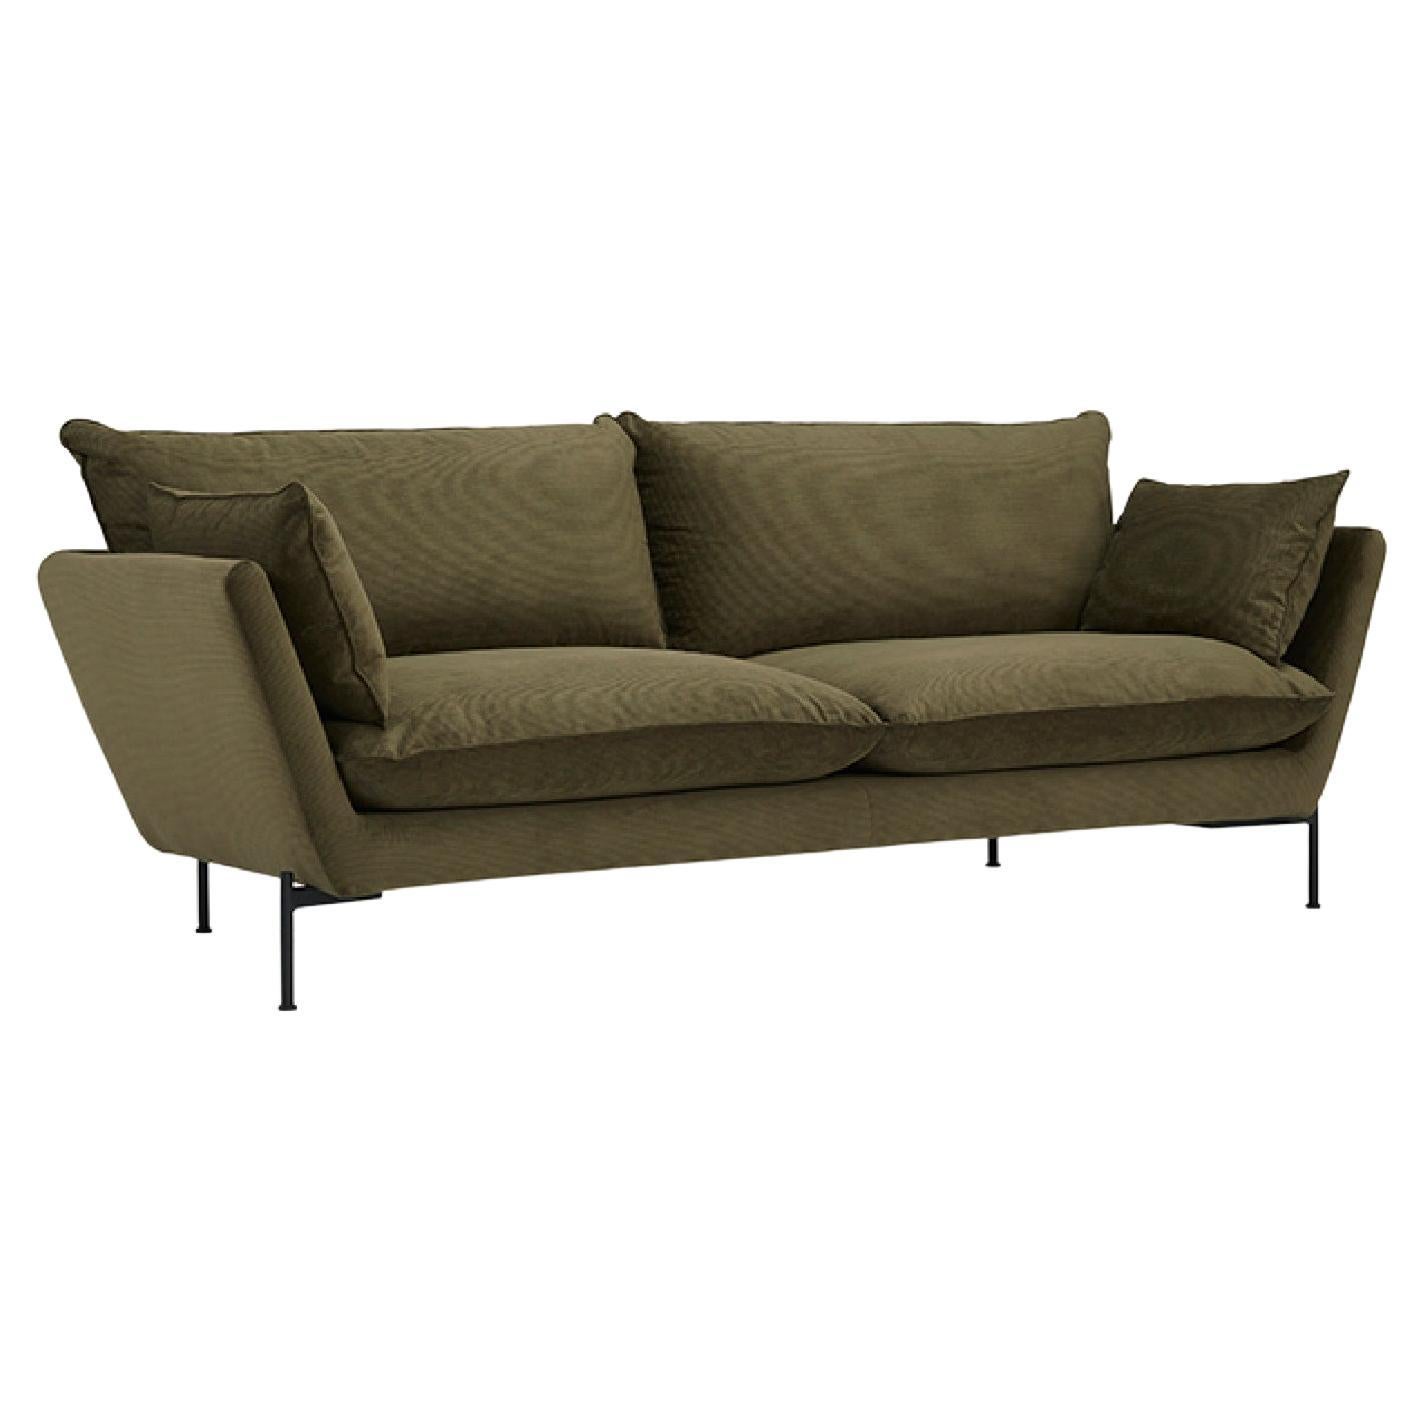 Hayche Nave Lux 2 Seater Sofa - Green, UK, Made to Order For Sale